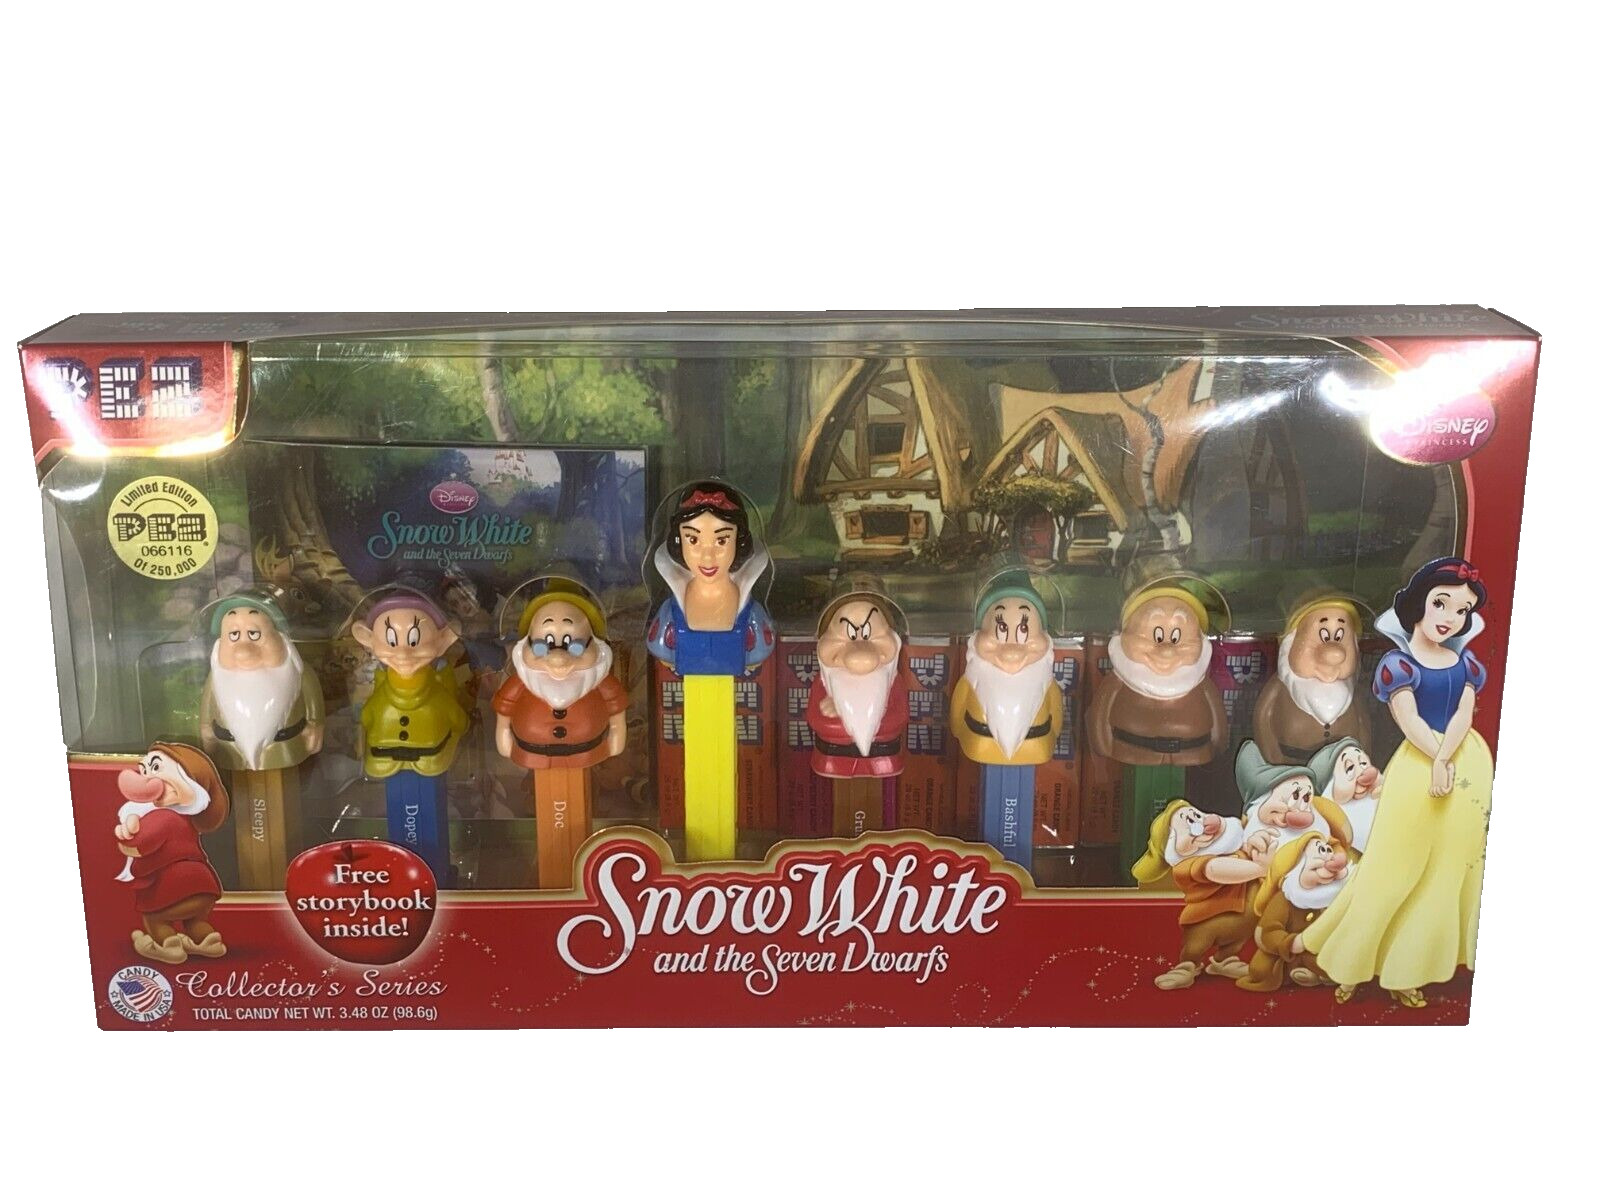 Disney PEZ Snow White and the Seven Dwarfs Collectors Series Limited Edition